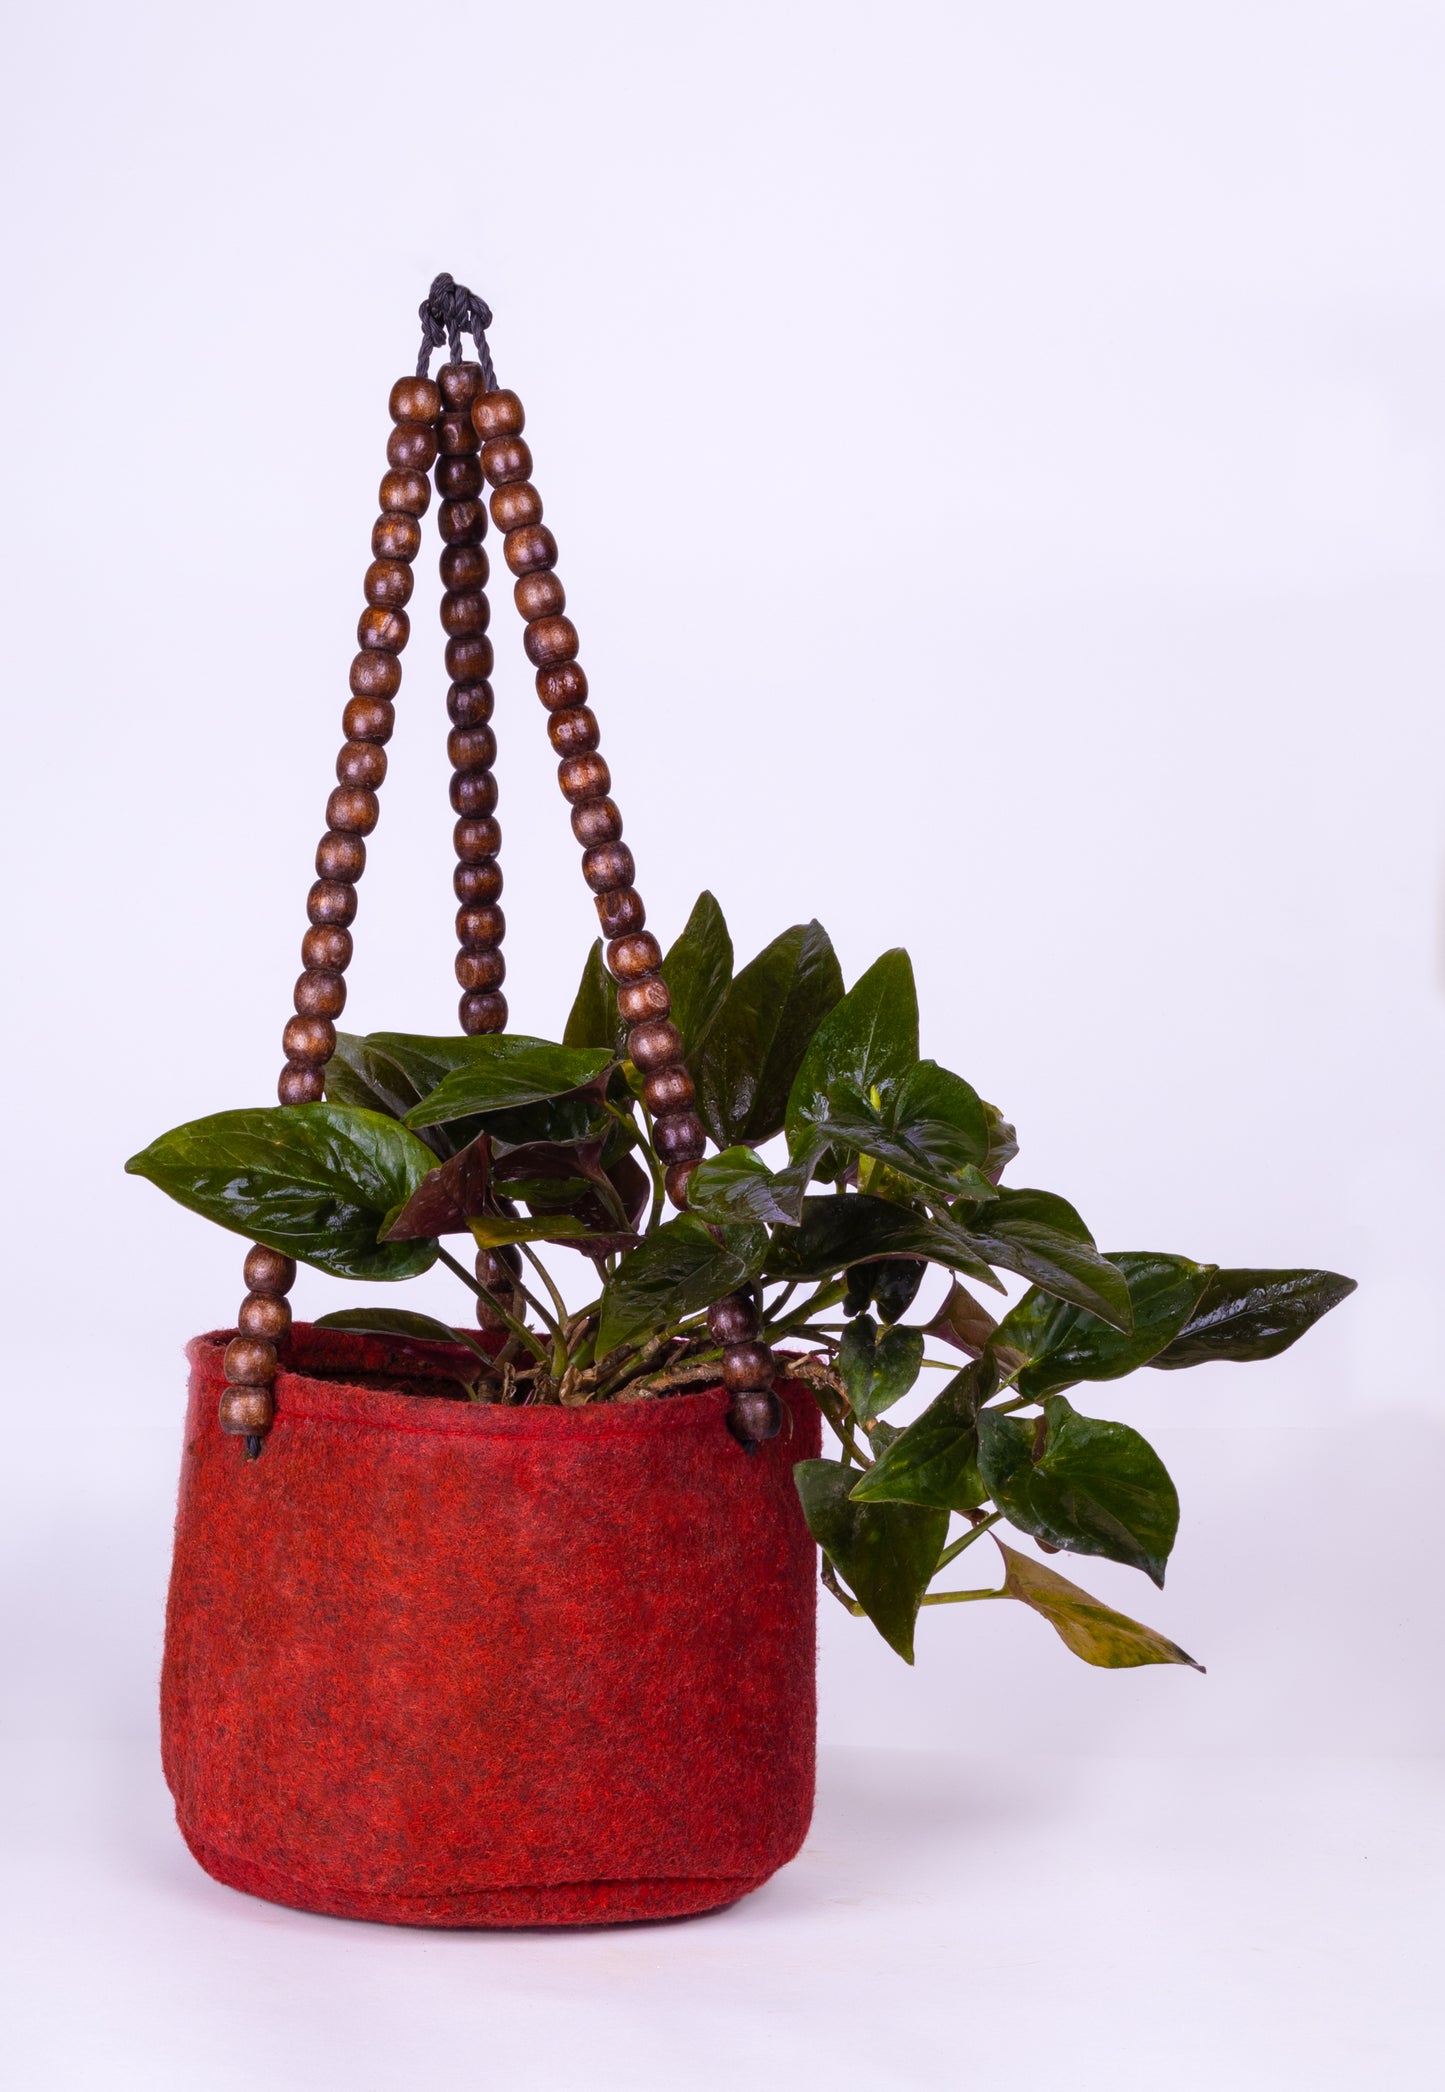 Fabric Grow bag - hanging 6X4 inches